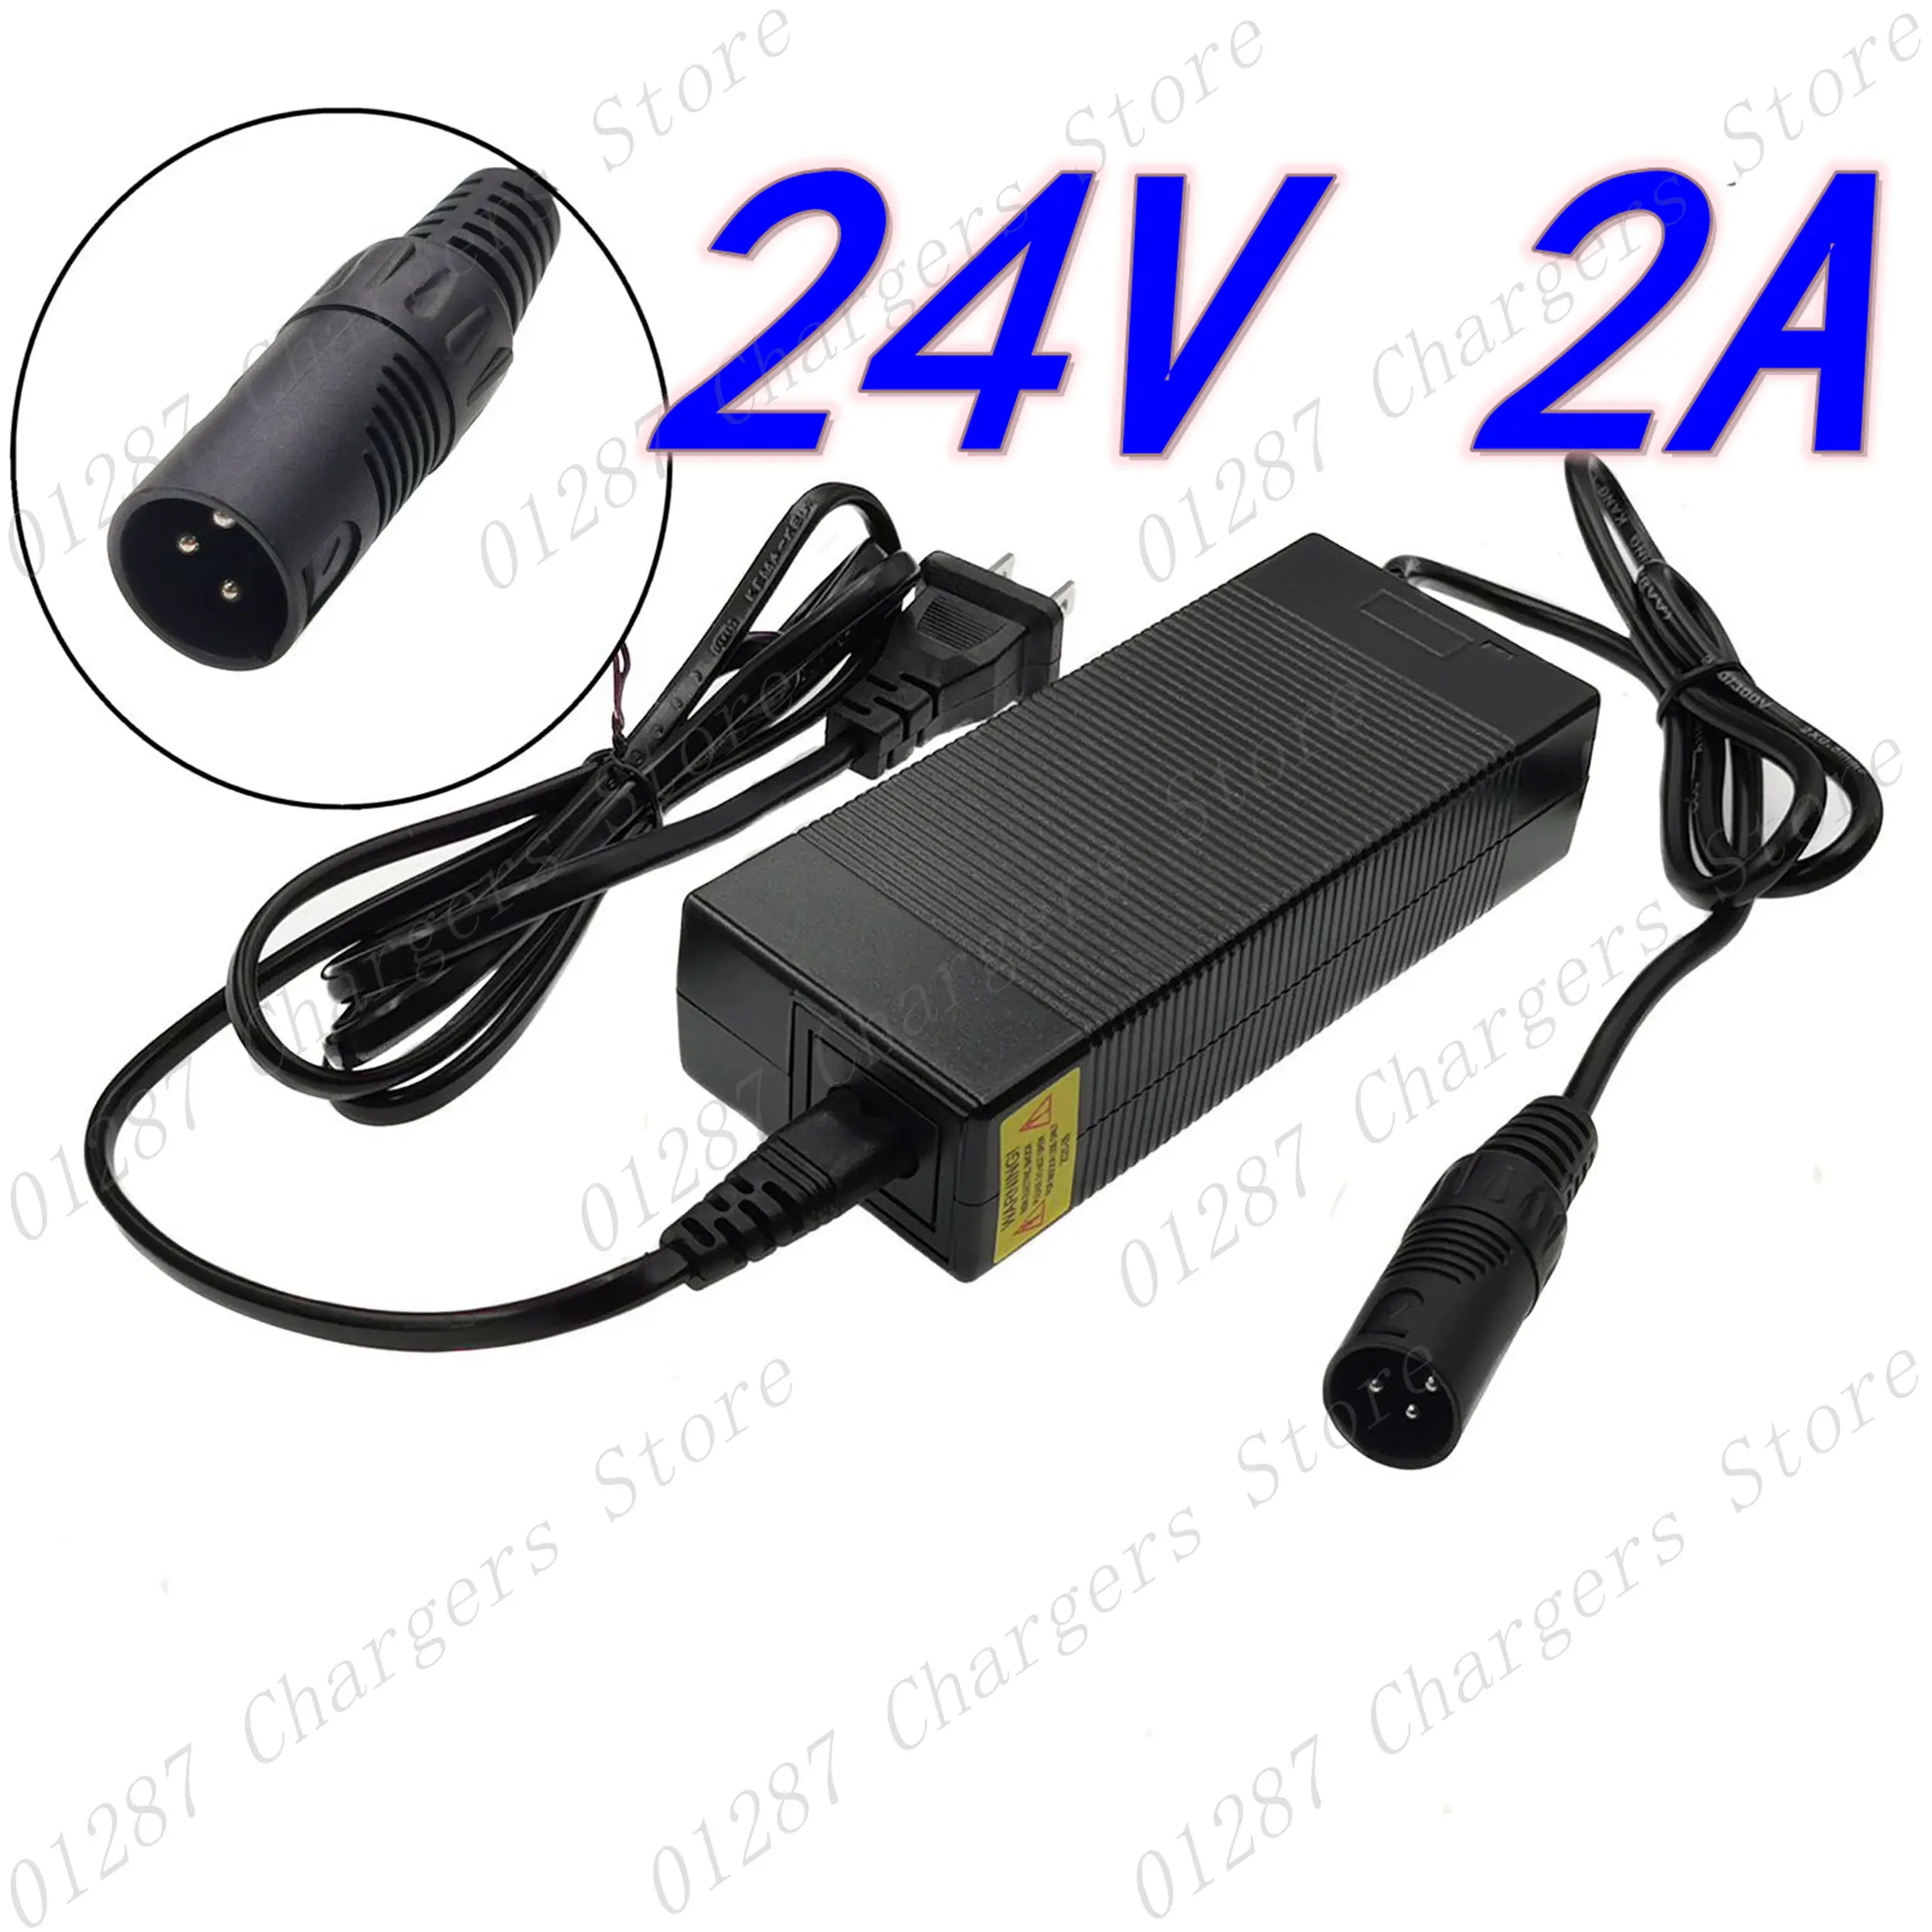 24V 2A lead-acid battery Charger  XLR metal connector wheelchair charger golf cart charger electric scooter ebike charger cart